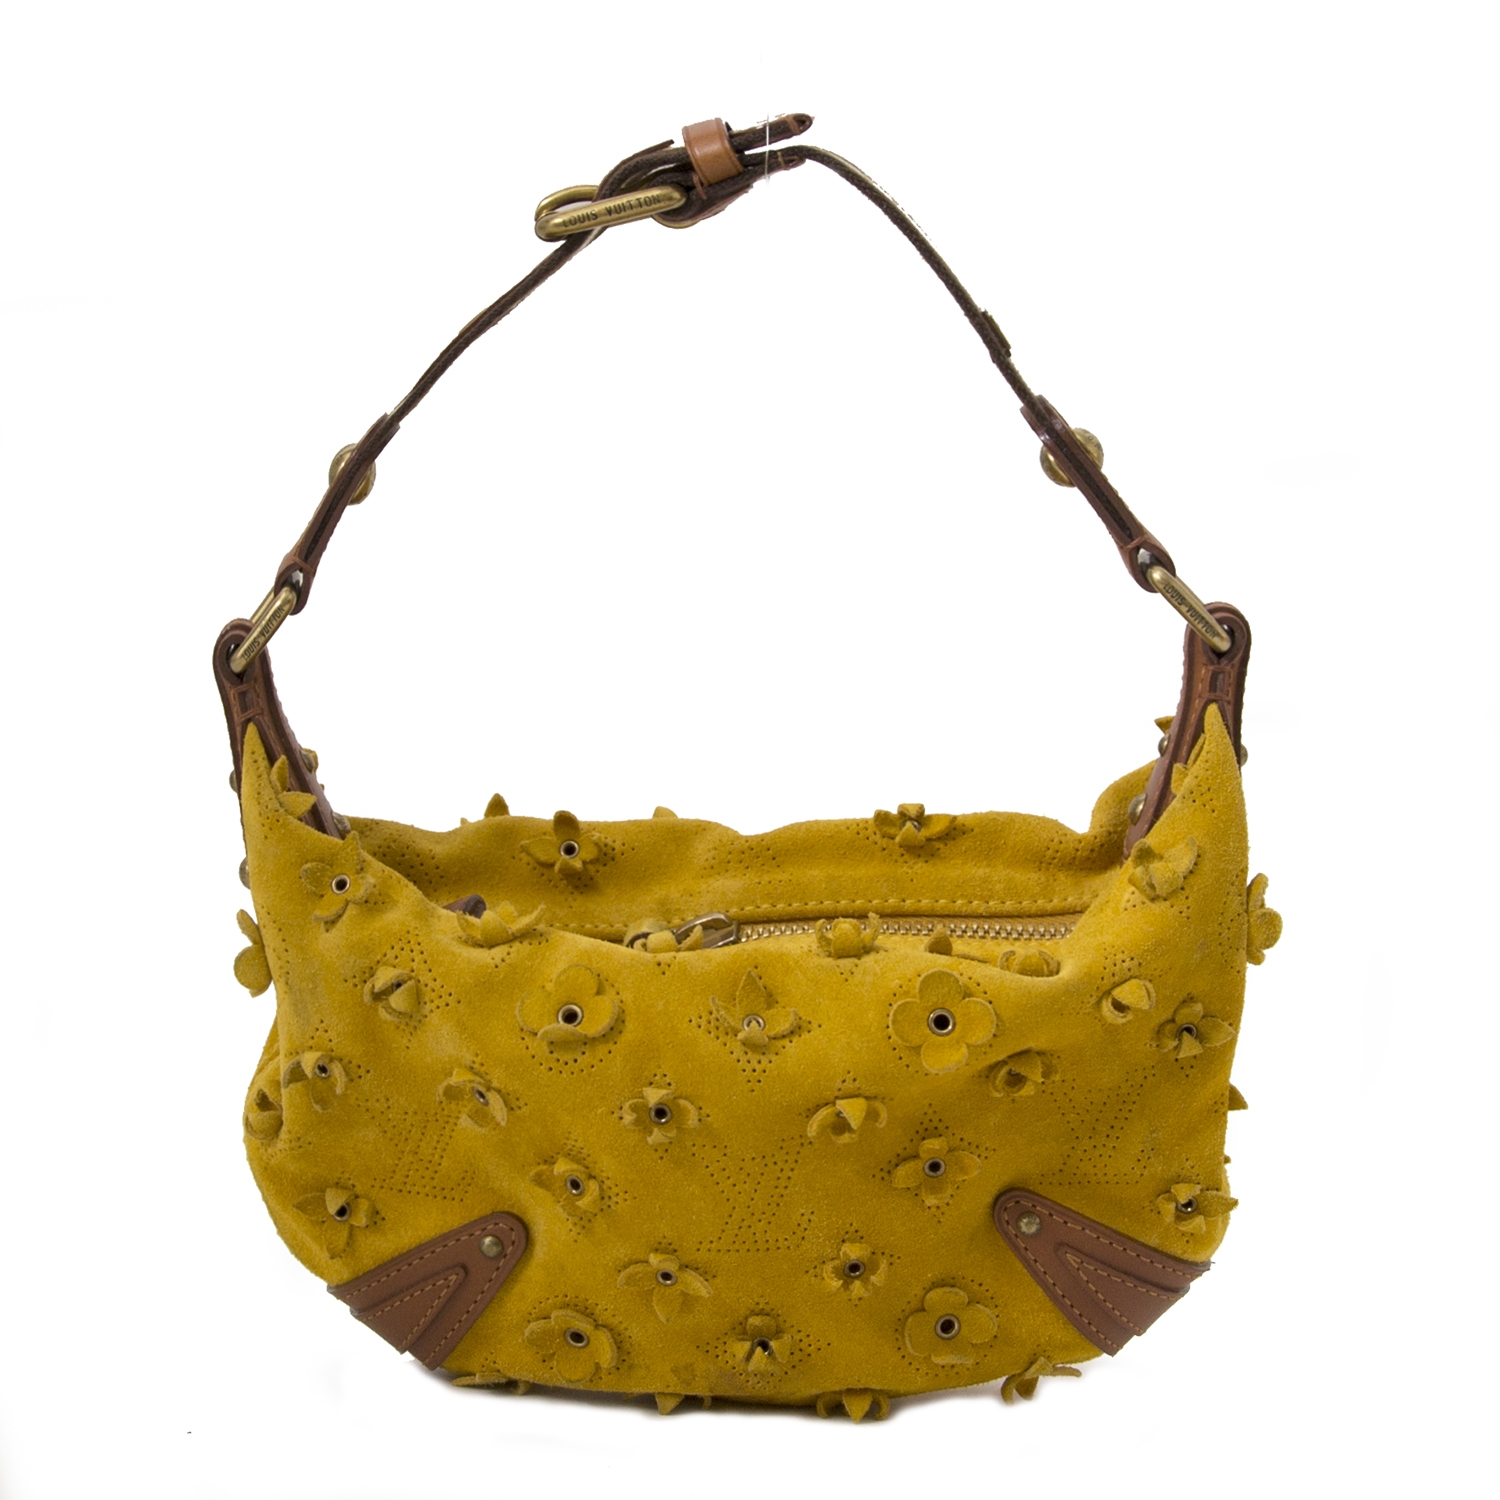 Sold at Auction: LOUIS VUITTON, ONATAH MM SADDLE BAG, STYLED IN MUSTARD  MONOGRAM MAHINA, FEATURING FULL ZIP CLOSURE AND ADJUSTABLE SHOULDER STRAP,  CI